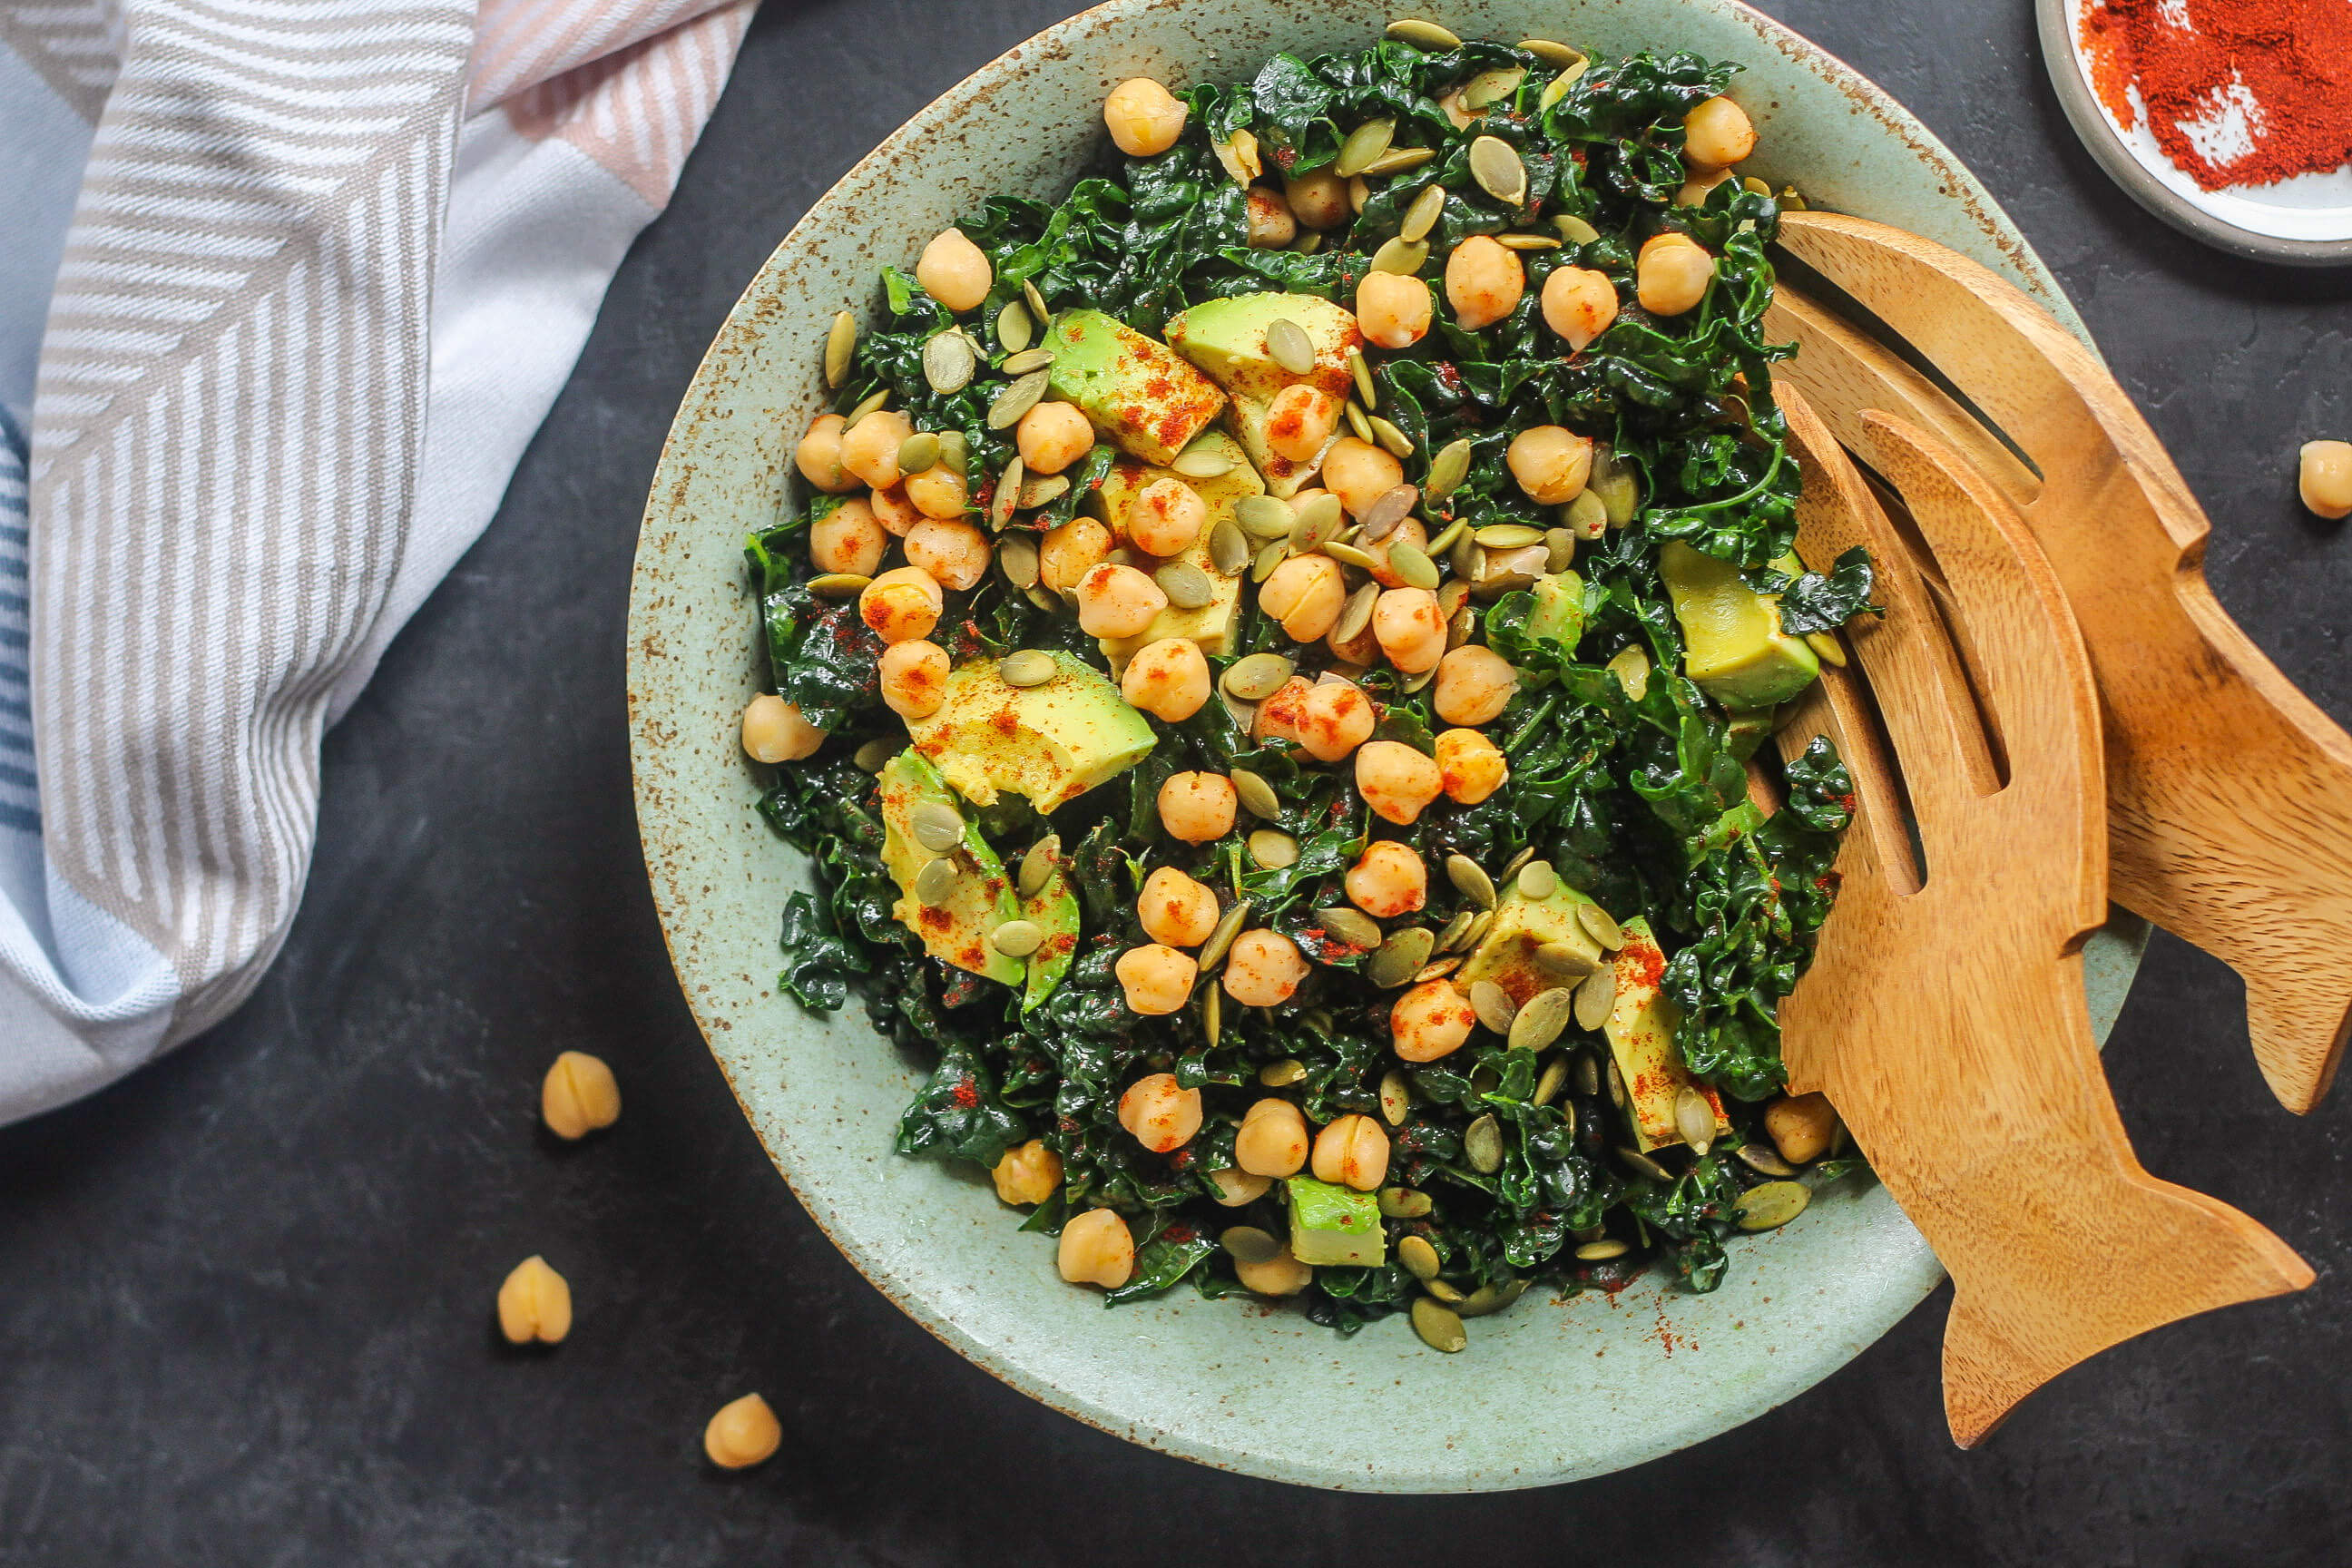 20 Meal Ideas to Help Clients Manage Acne: Lemon Kale Salad with Chickpeas & Avocado